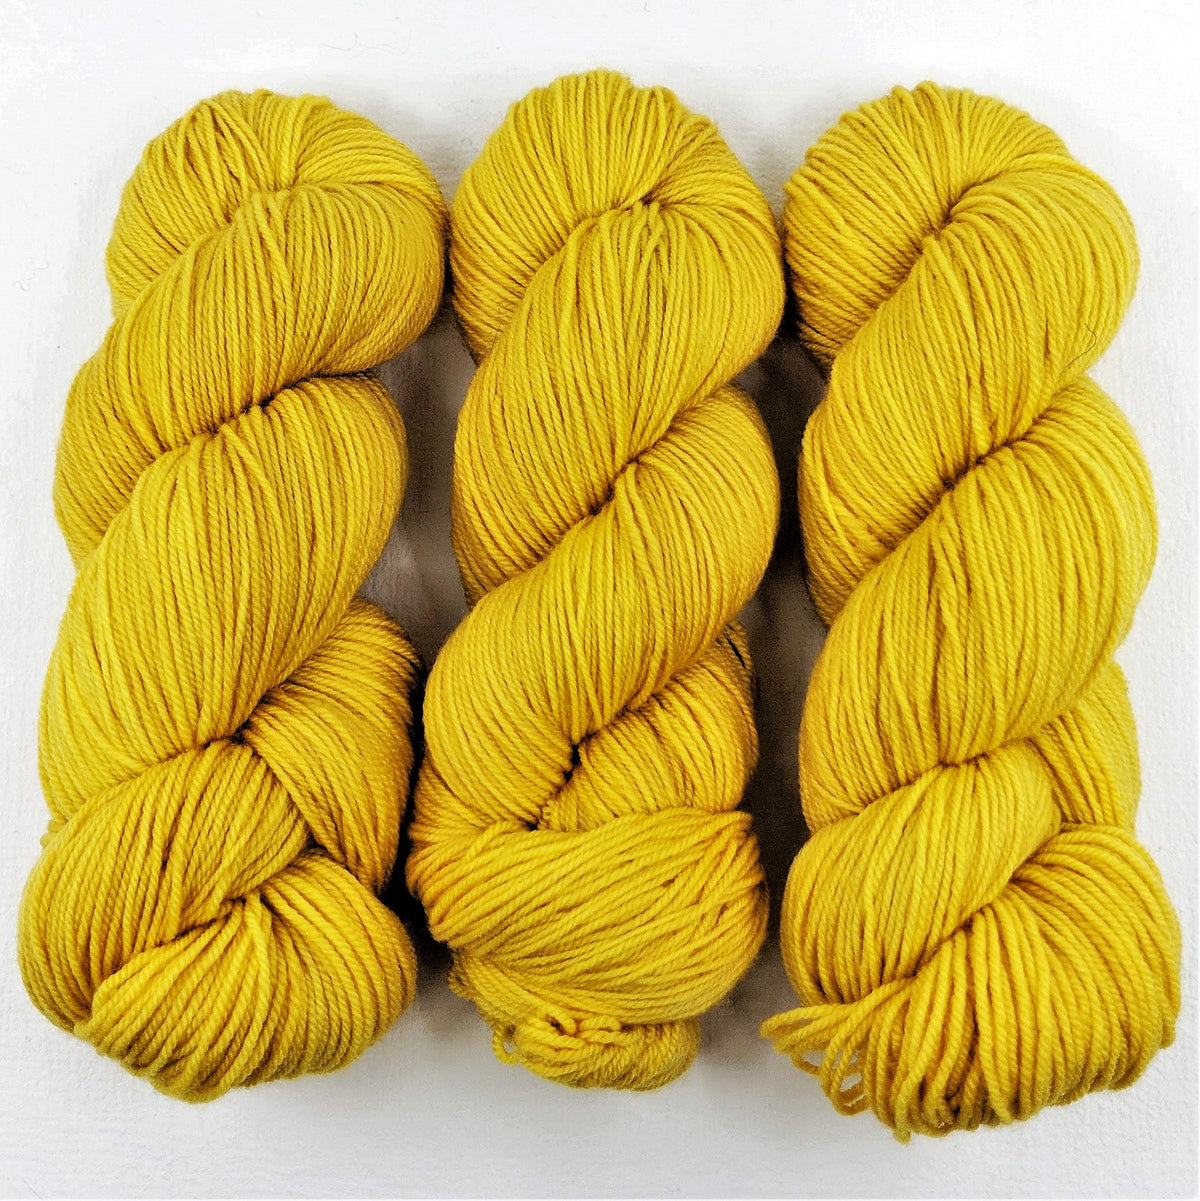 Sunflower in Worsted Weight